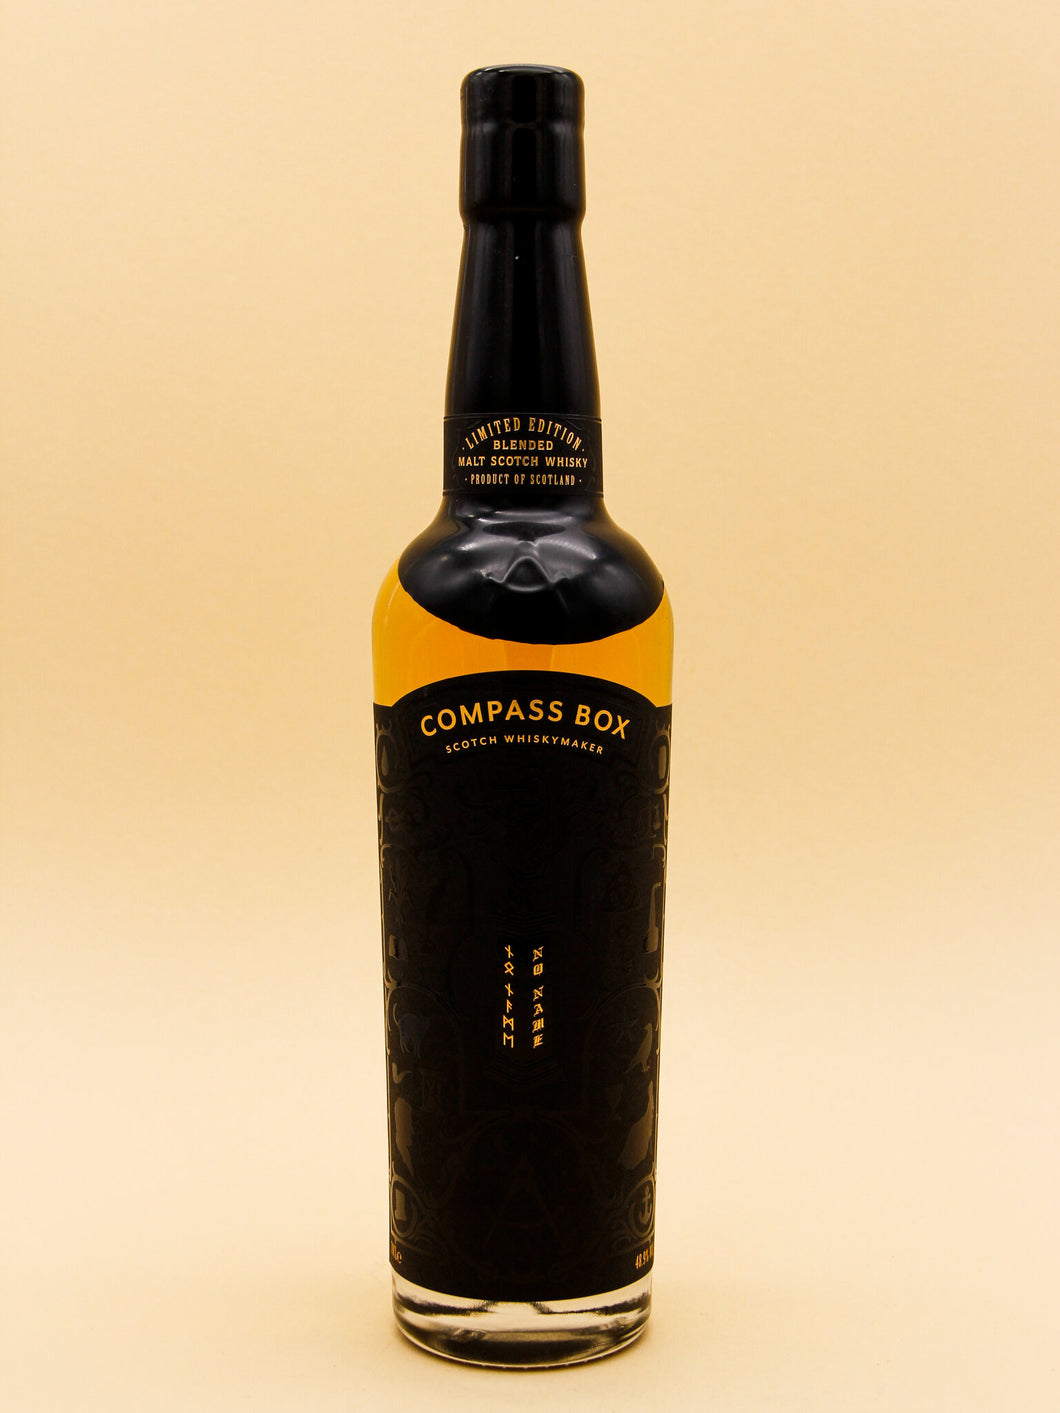 Compass Box No Name, Blended Malt Scotch Whisky, Limited Edition (48.9%, 70cl)